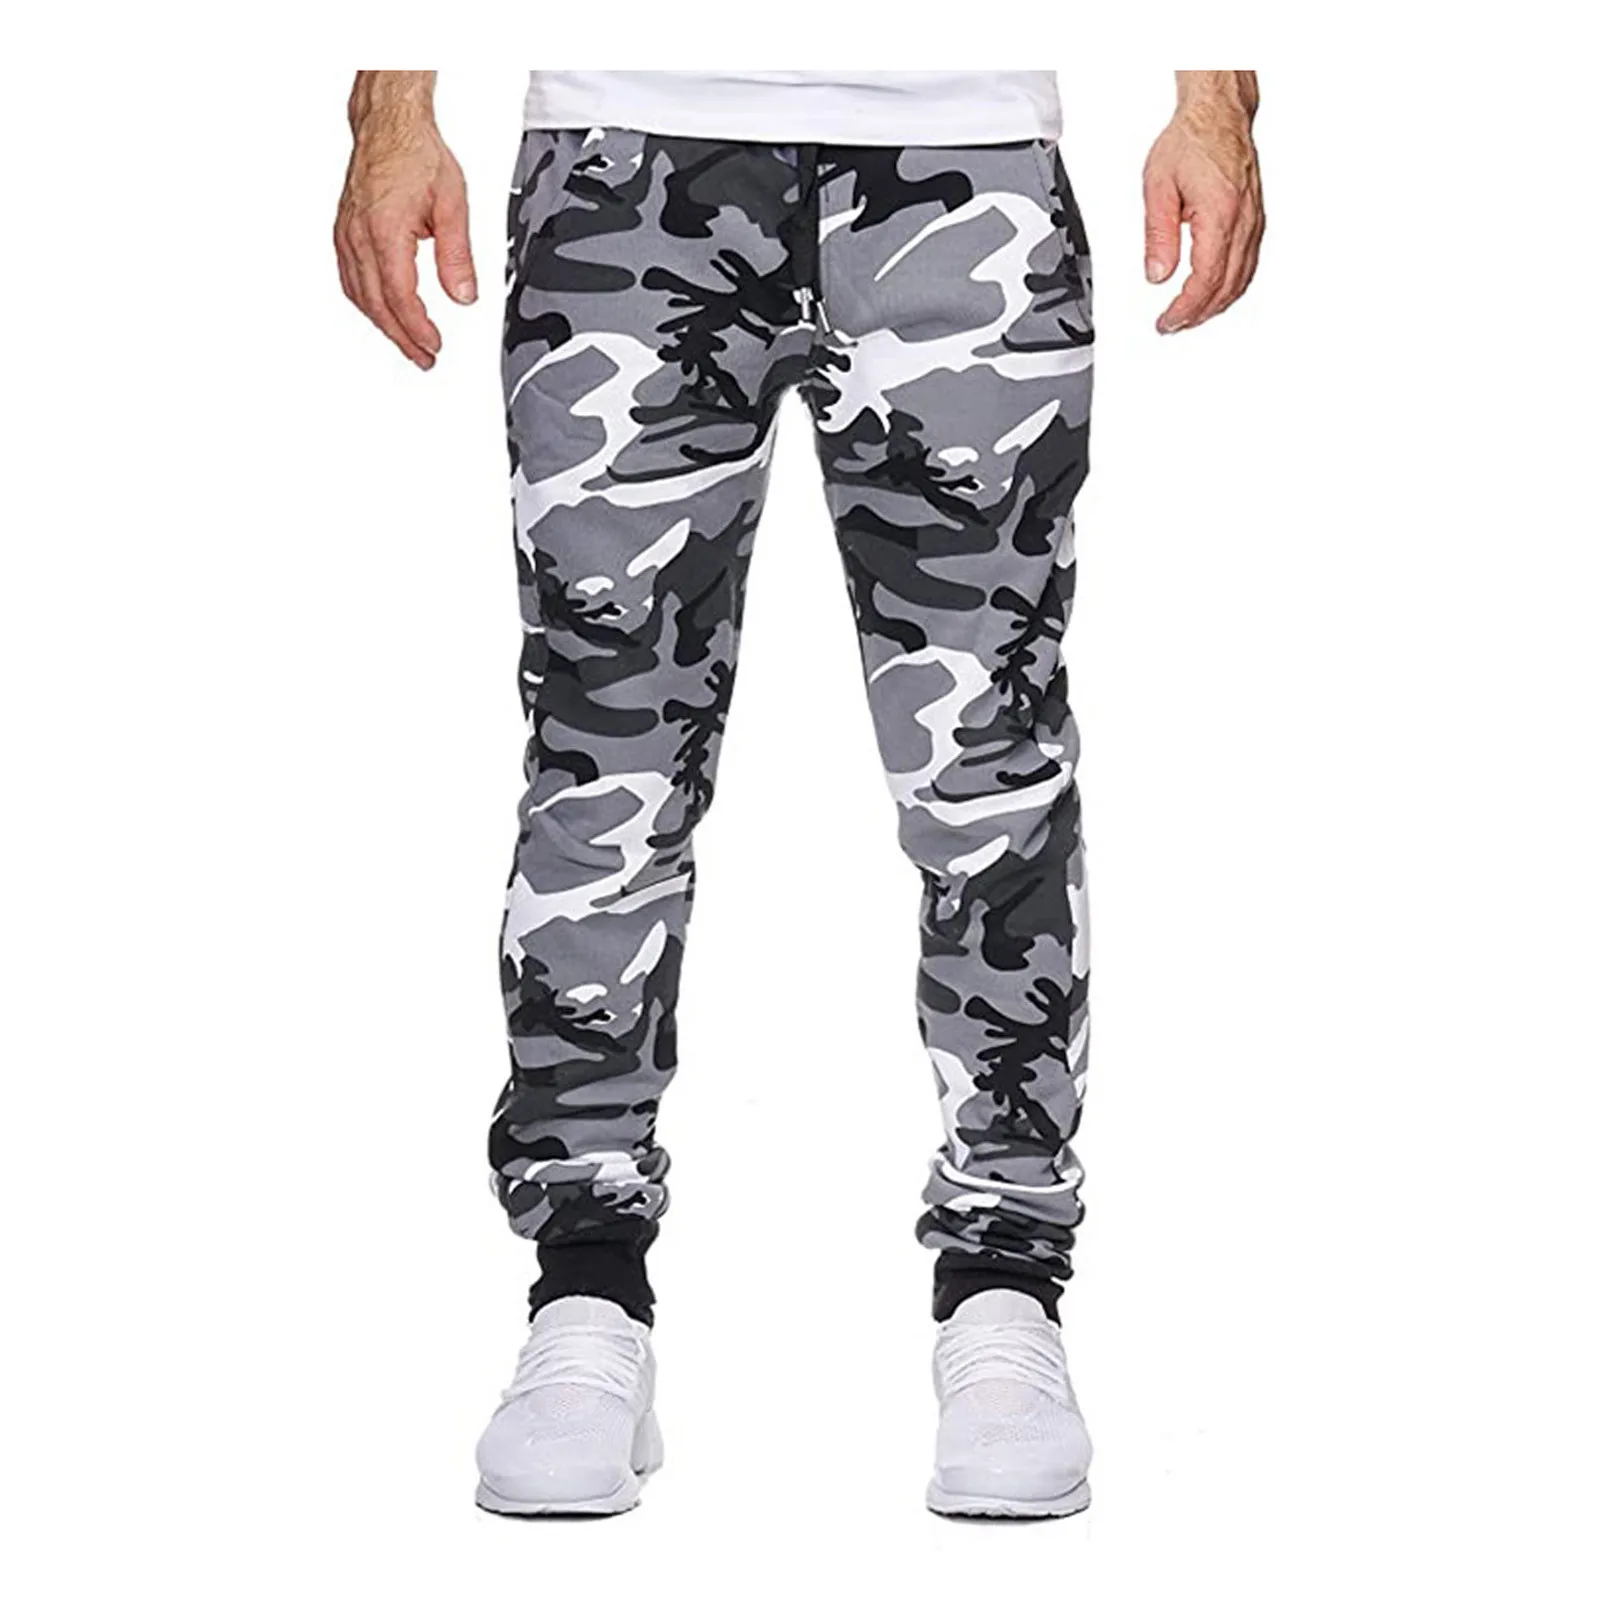 

Mege Tactical Camouflage Joggers Outdoor Ripstop Cargo Pants Working Clothing Hiking Hunting Combat Trousers Men'S Streetwear